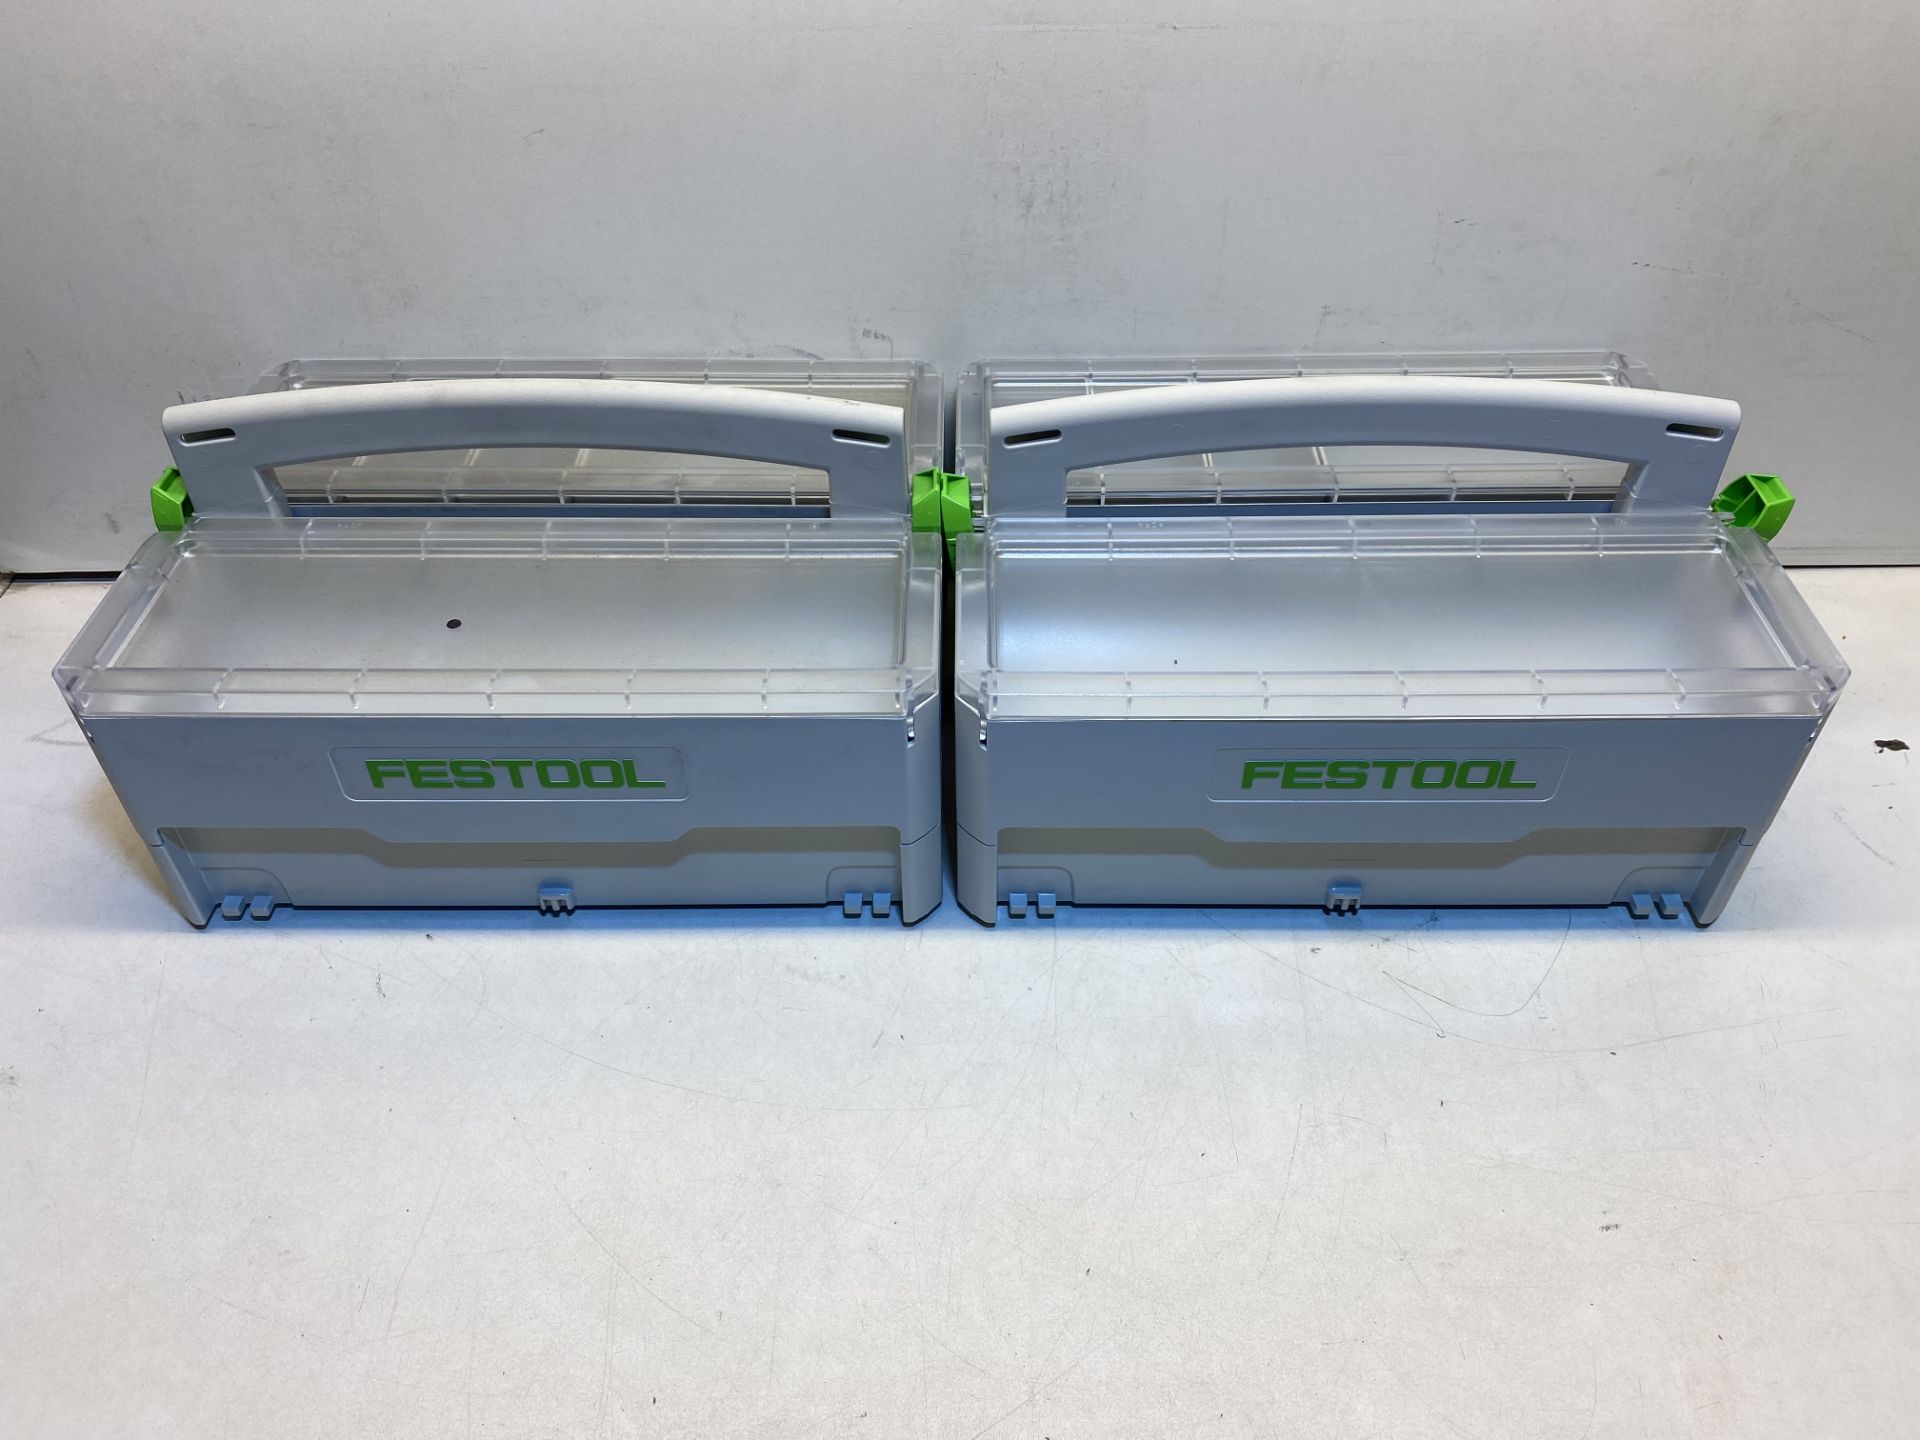 2 x Festool 499901 SYS-SB Cantilever Systainer Tool Box